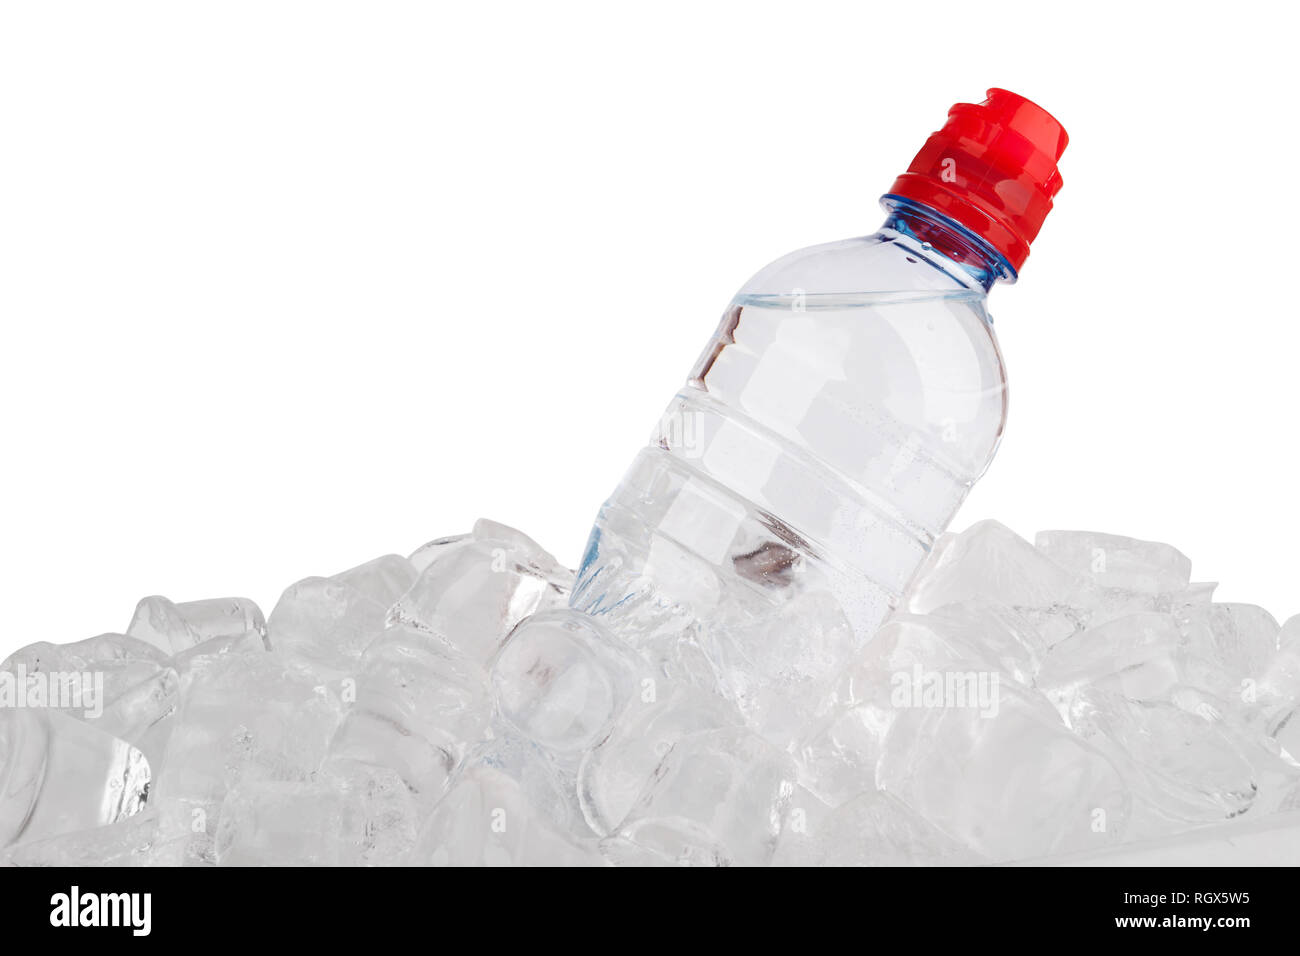 https://c8.alamy.com/comp/RGX5W5/water-bottle-in-ice-cube-isolated-on-a-white-background-RGX5W5.jpg